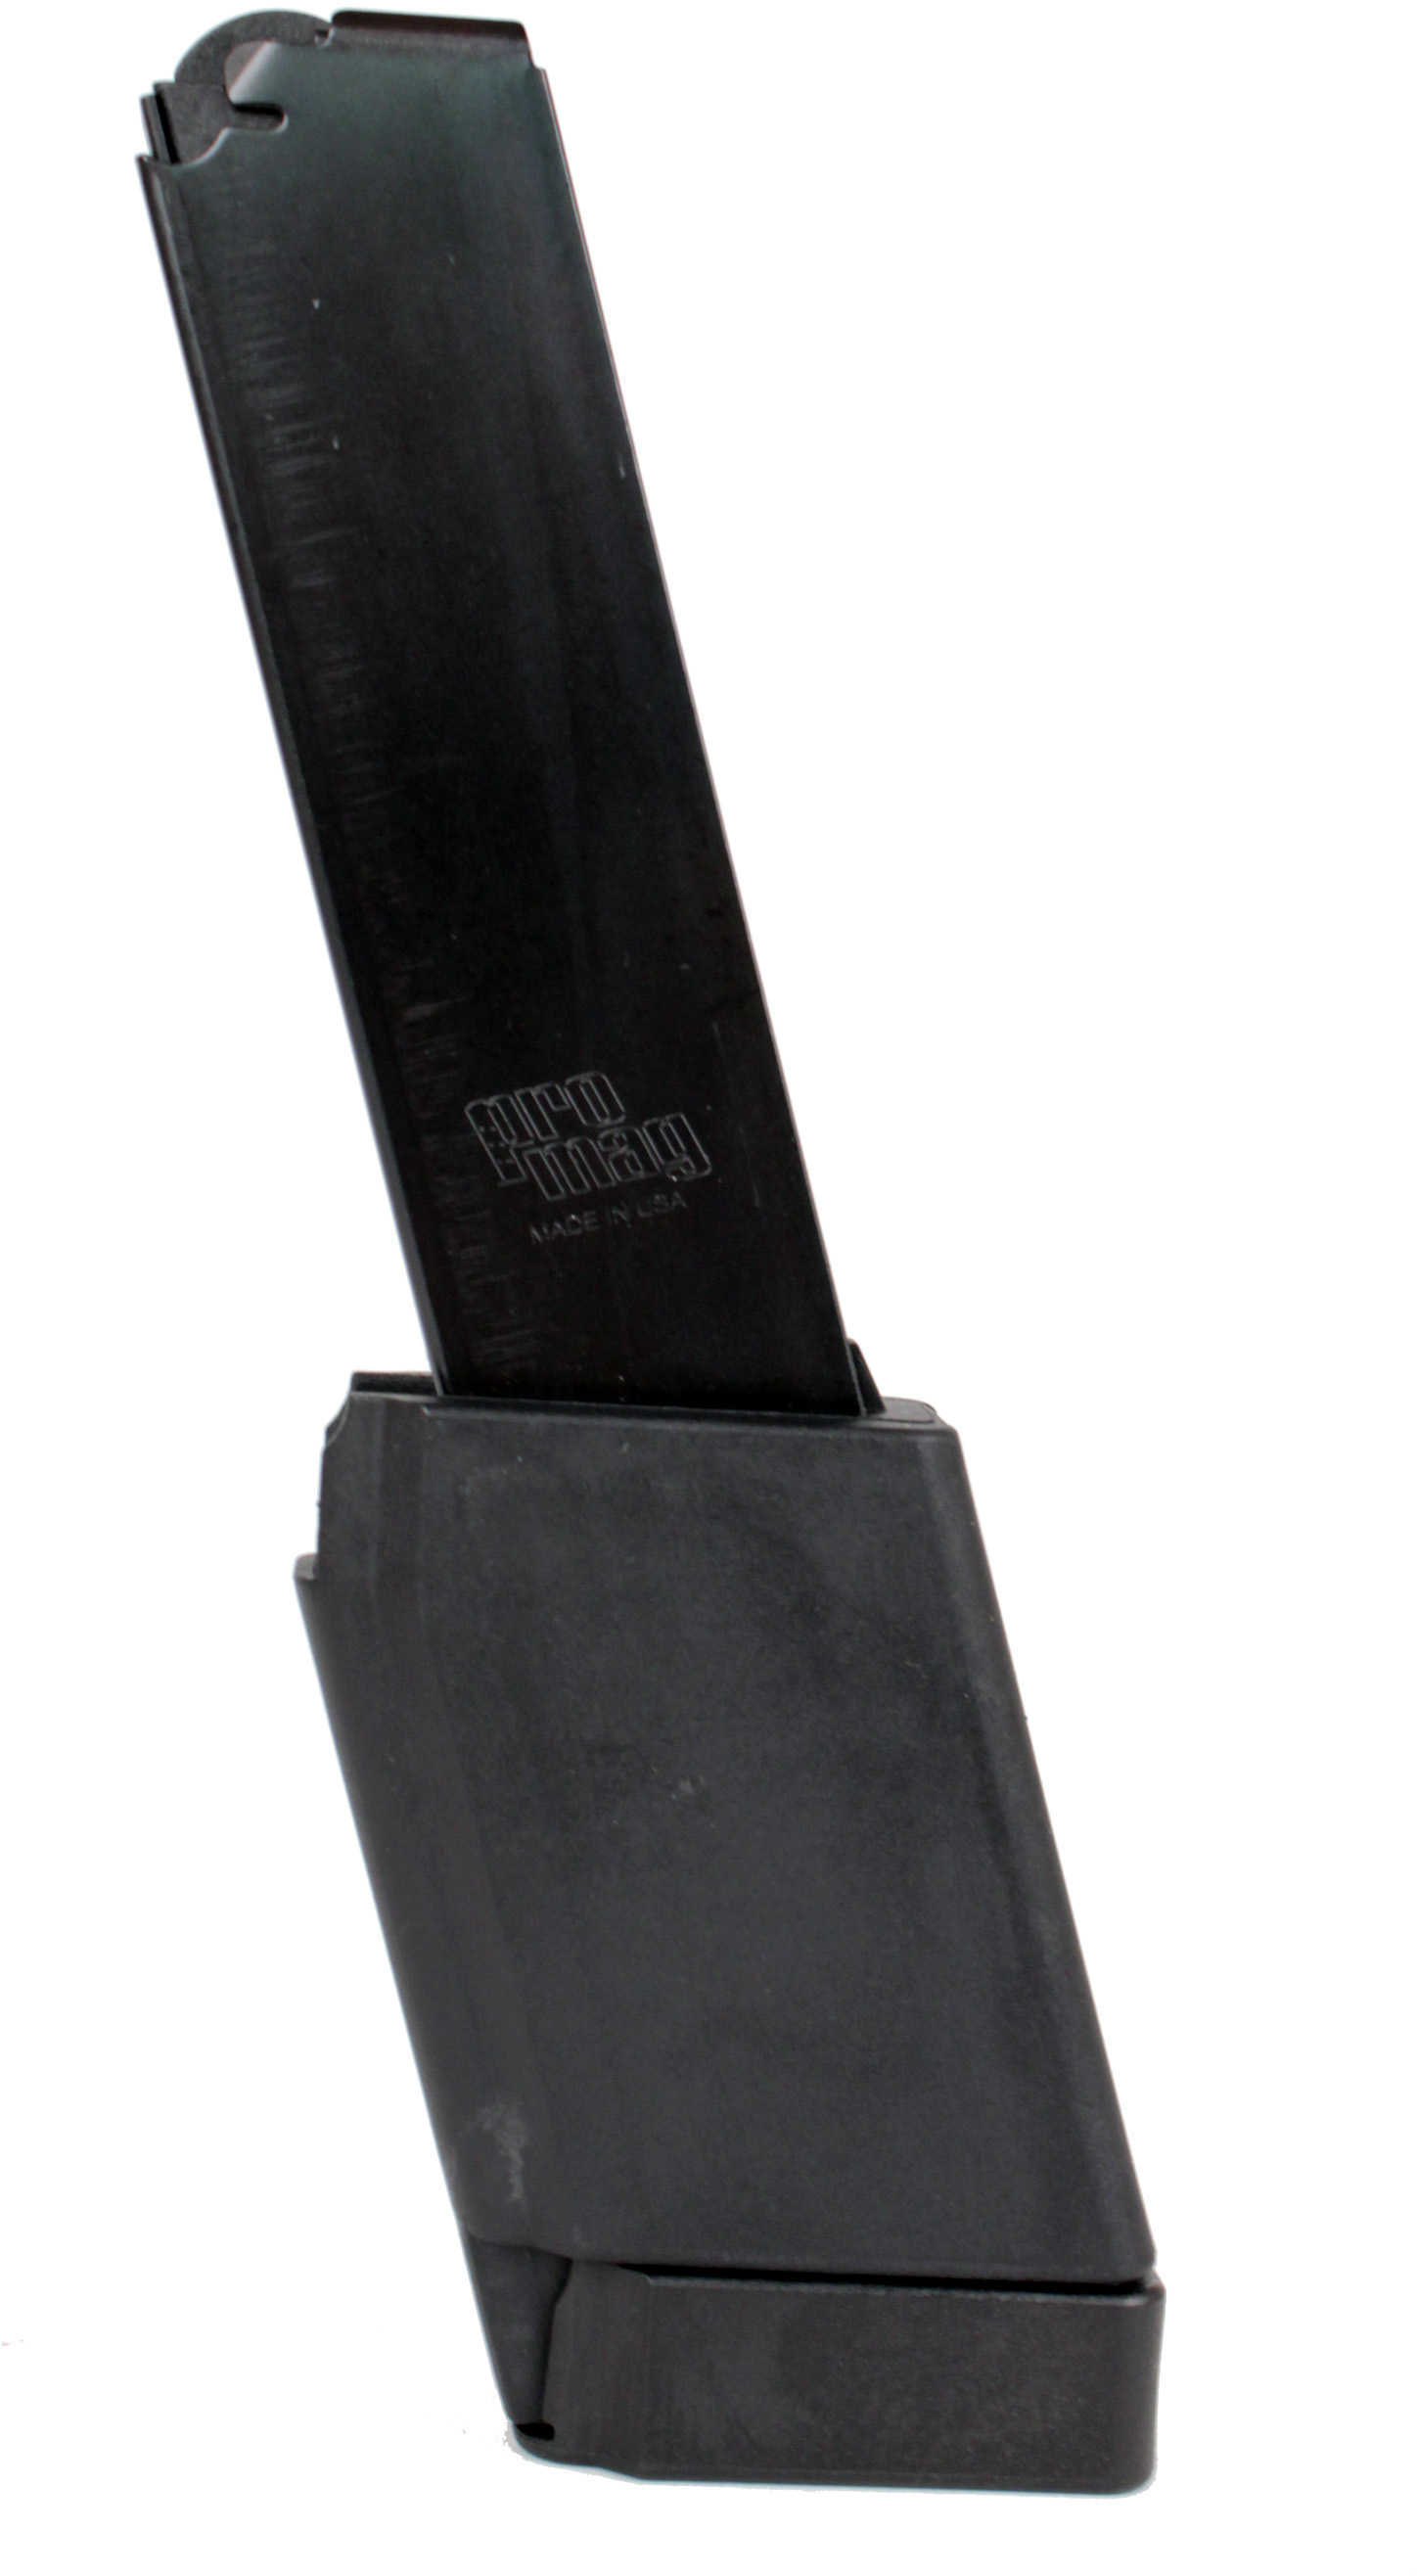 Promag HiPA5 Hi-Point 4095TS 40 Smith & Wesson 15 Rd Blued Finish